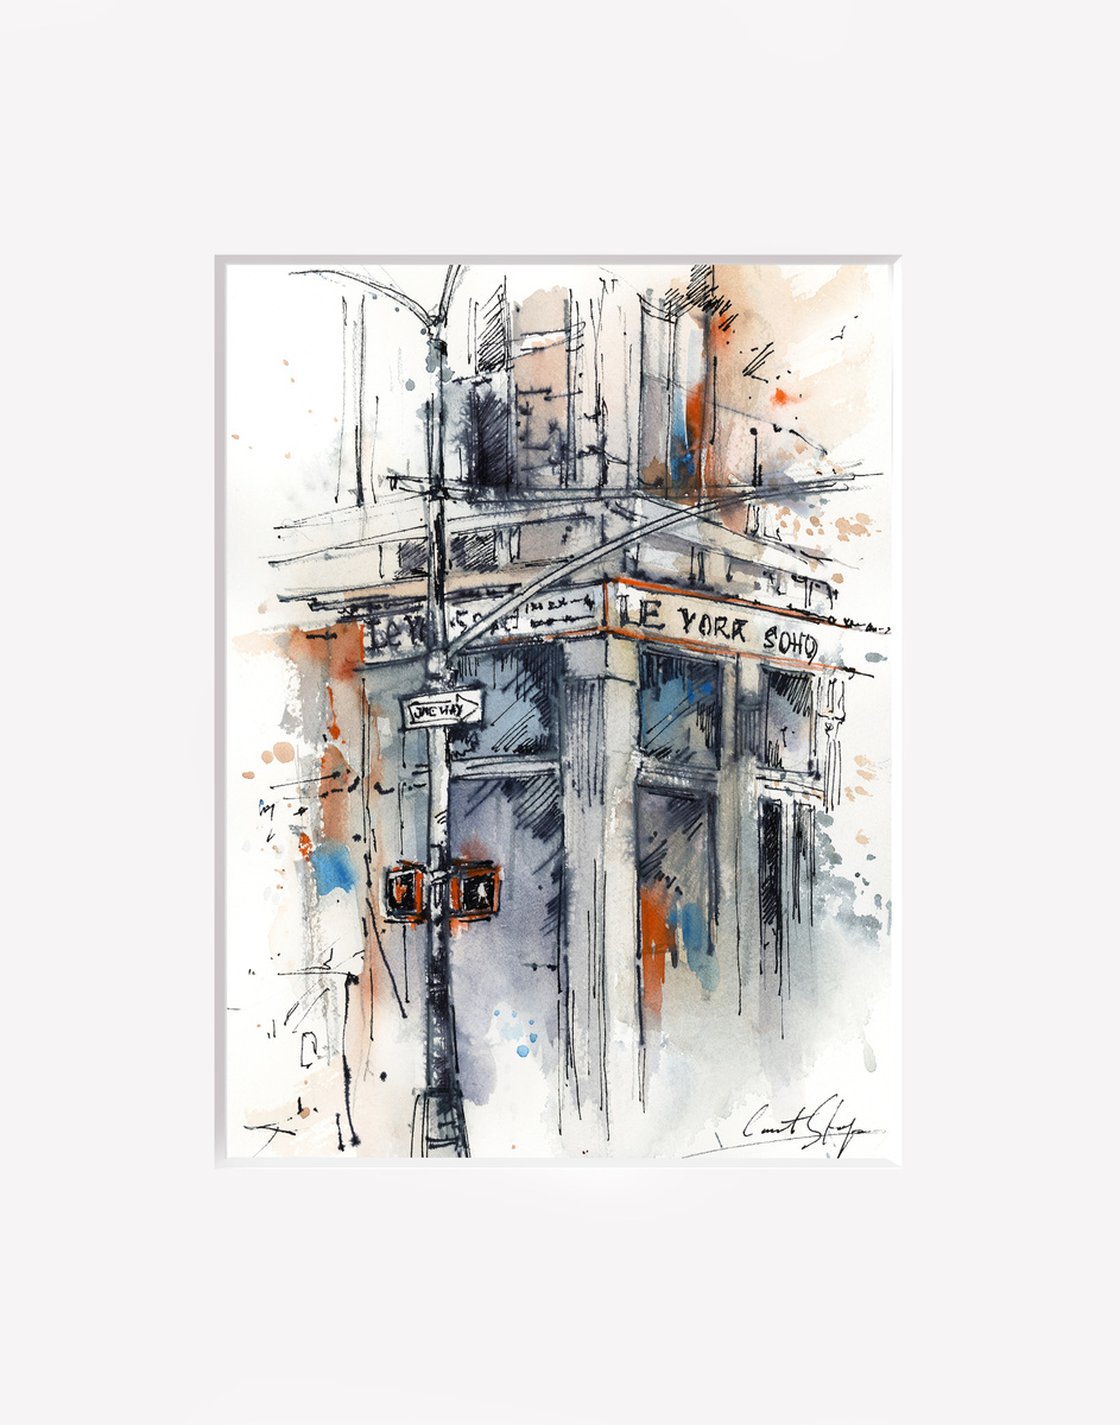 New York - Architecture Sketch Mixed Media Mixed-media painting by Sophie  Rodionov